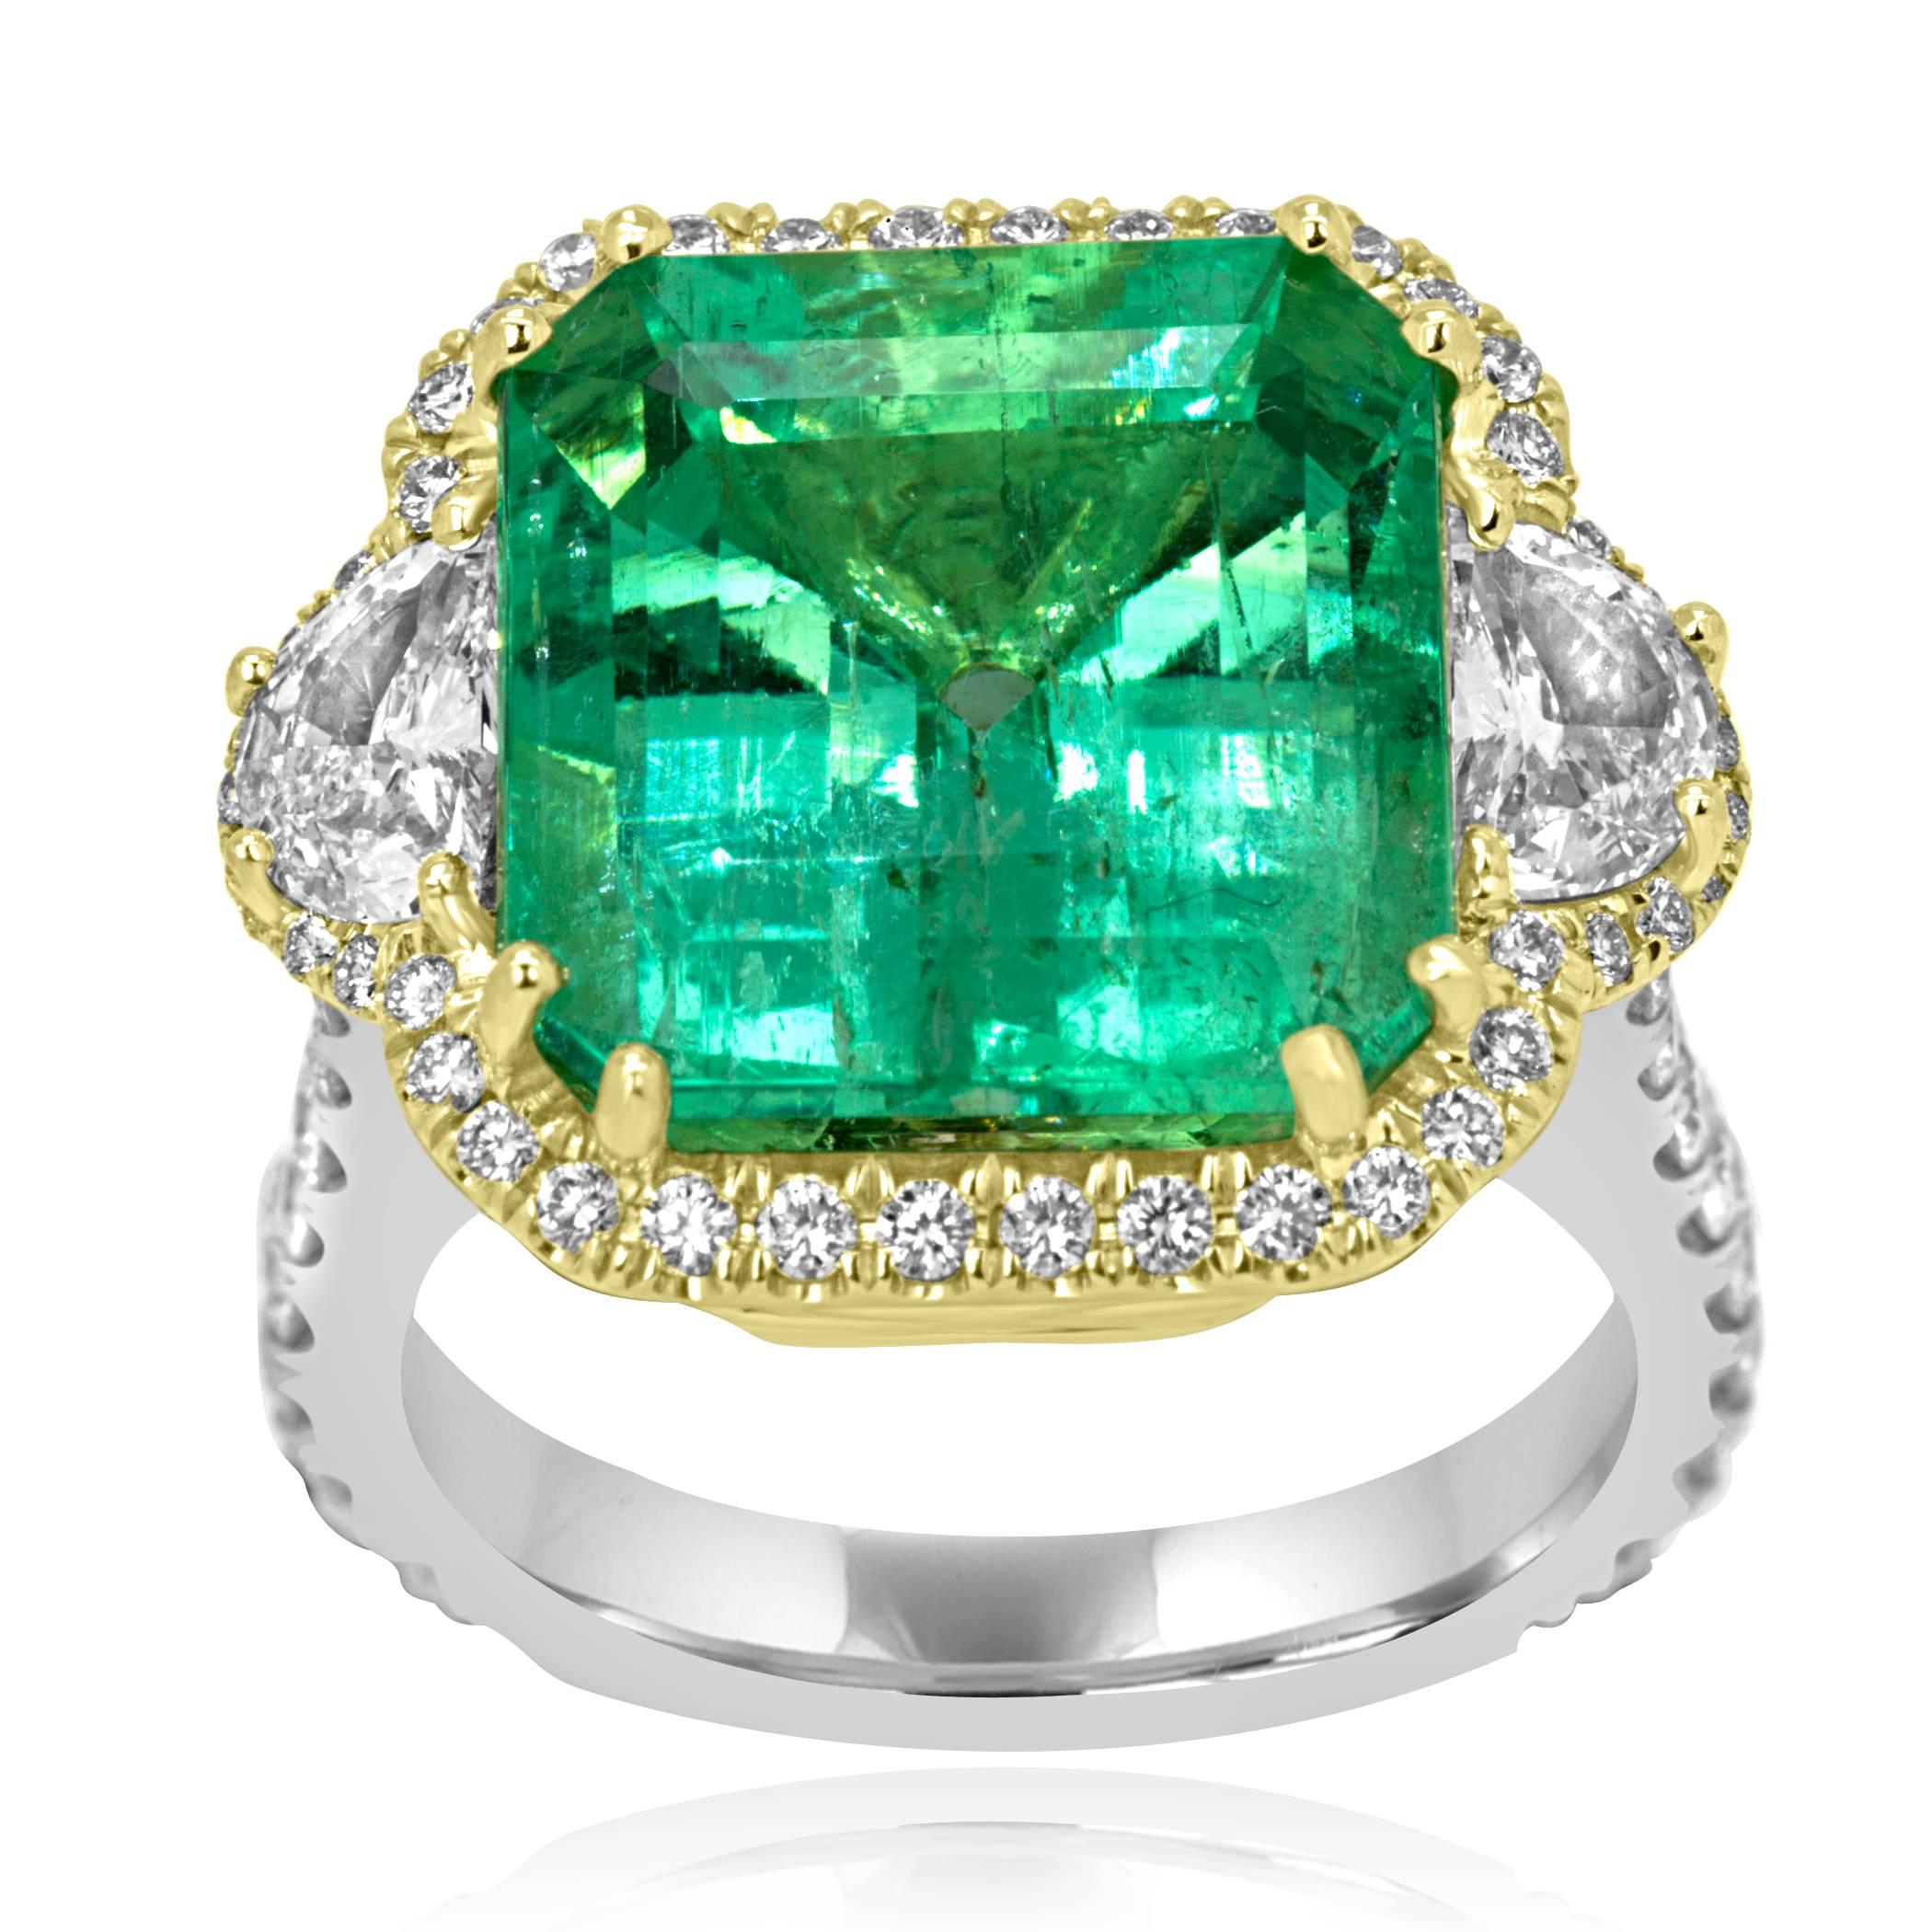 Stunning GIA Certified Colombian Emerald Cut Emerald 10.20 Carat encircled in a single Halo of Colorless Diamonds VS Clarity 0.90 Carat Flanked with 2 Colorless Half Moon Vs Clarity Diamonds 0.67 Carat on the Side  in 18K White and Yellow Gold one